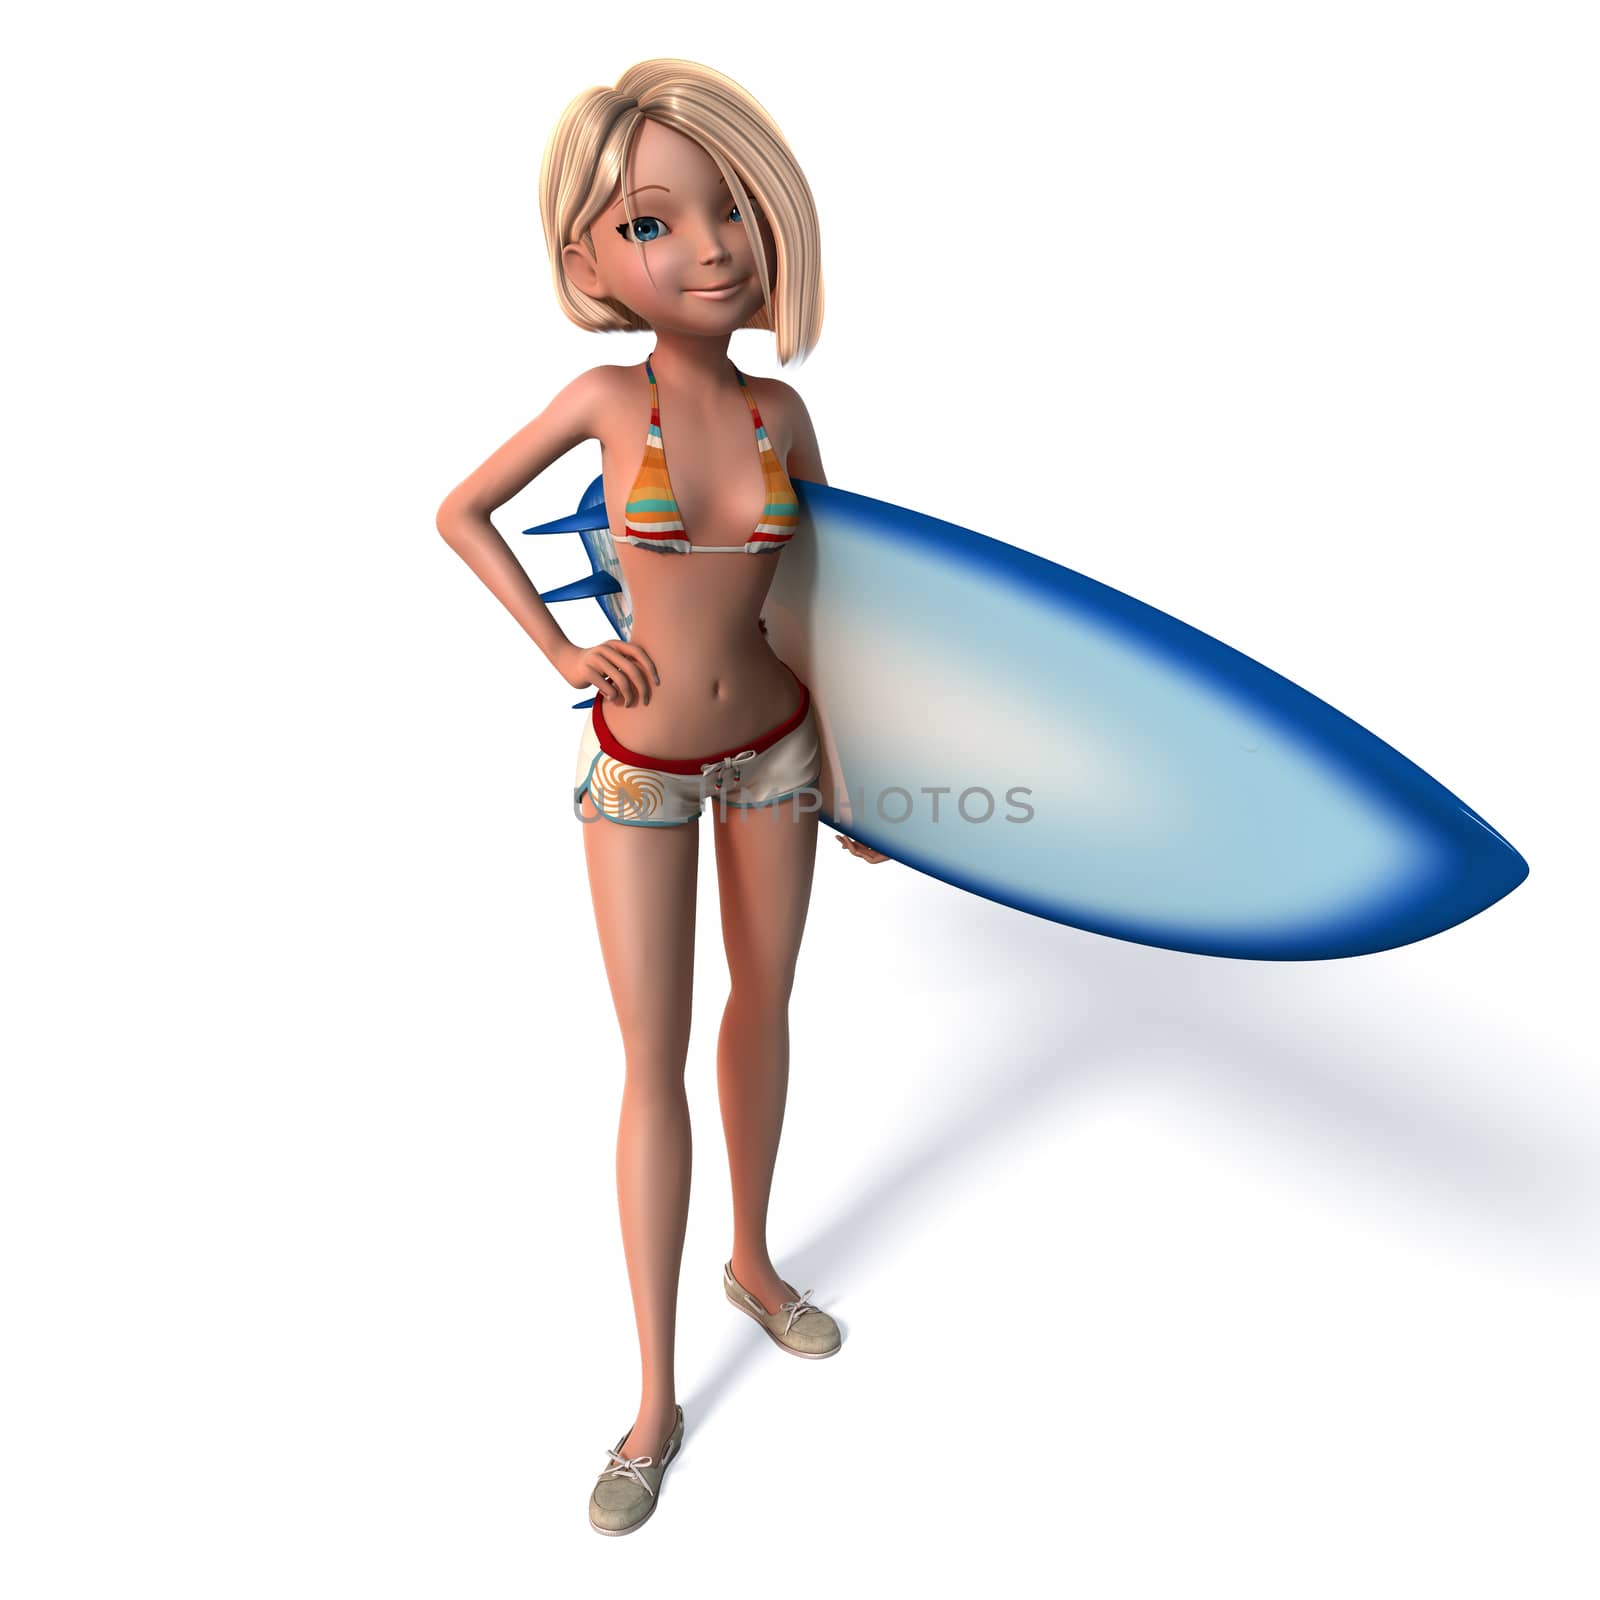 Young Girl With Surfboard by vik173